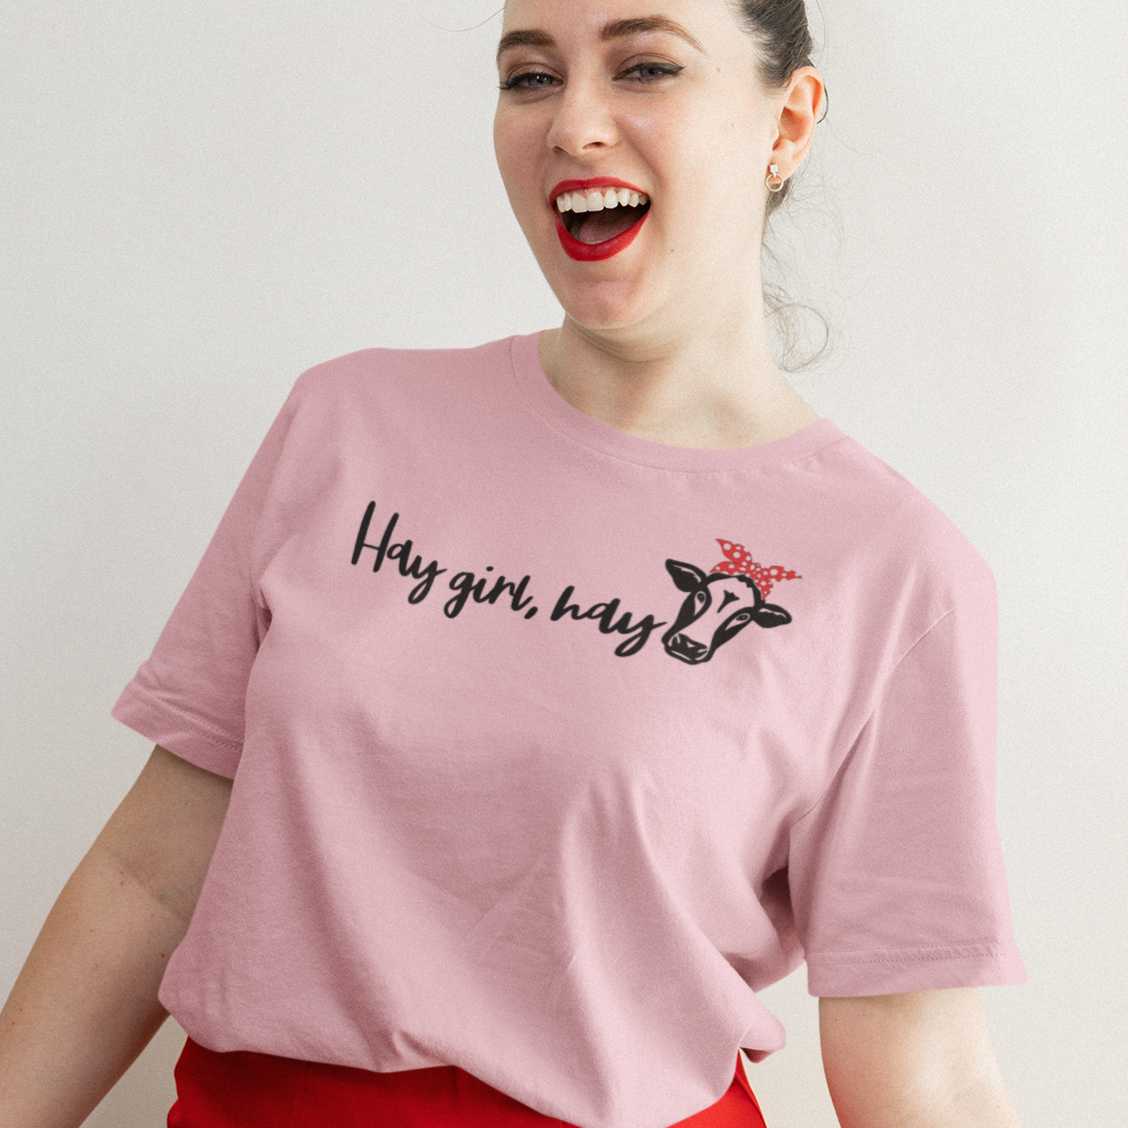 hay-girl-hay-pink-t-shirt-cowgirl-womens-t-mockup-of-a-happy-woman-posing-with-her-valentine-s-day-outfit